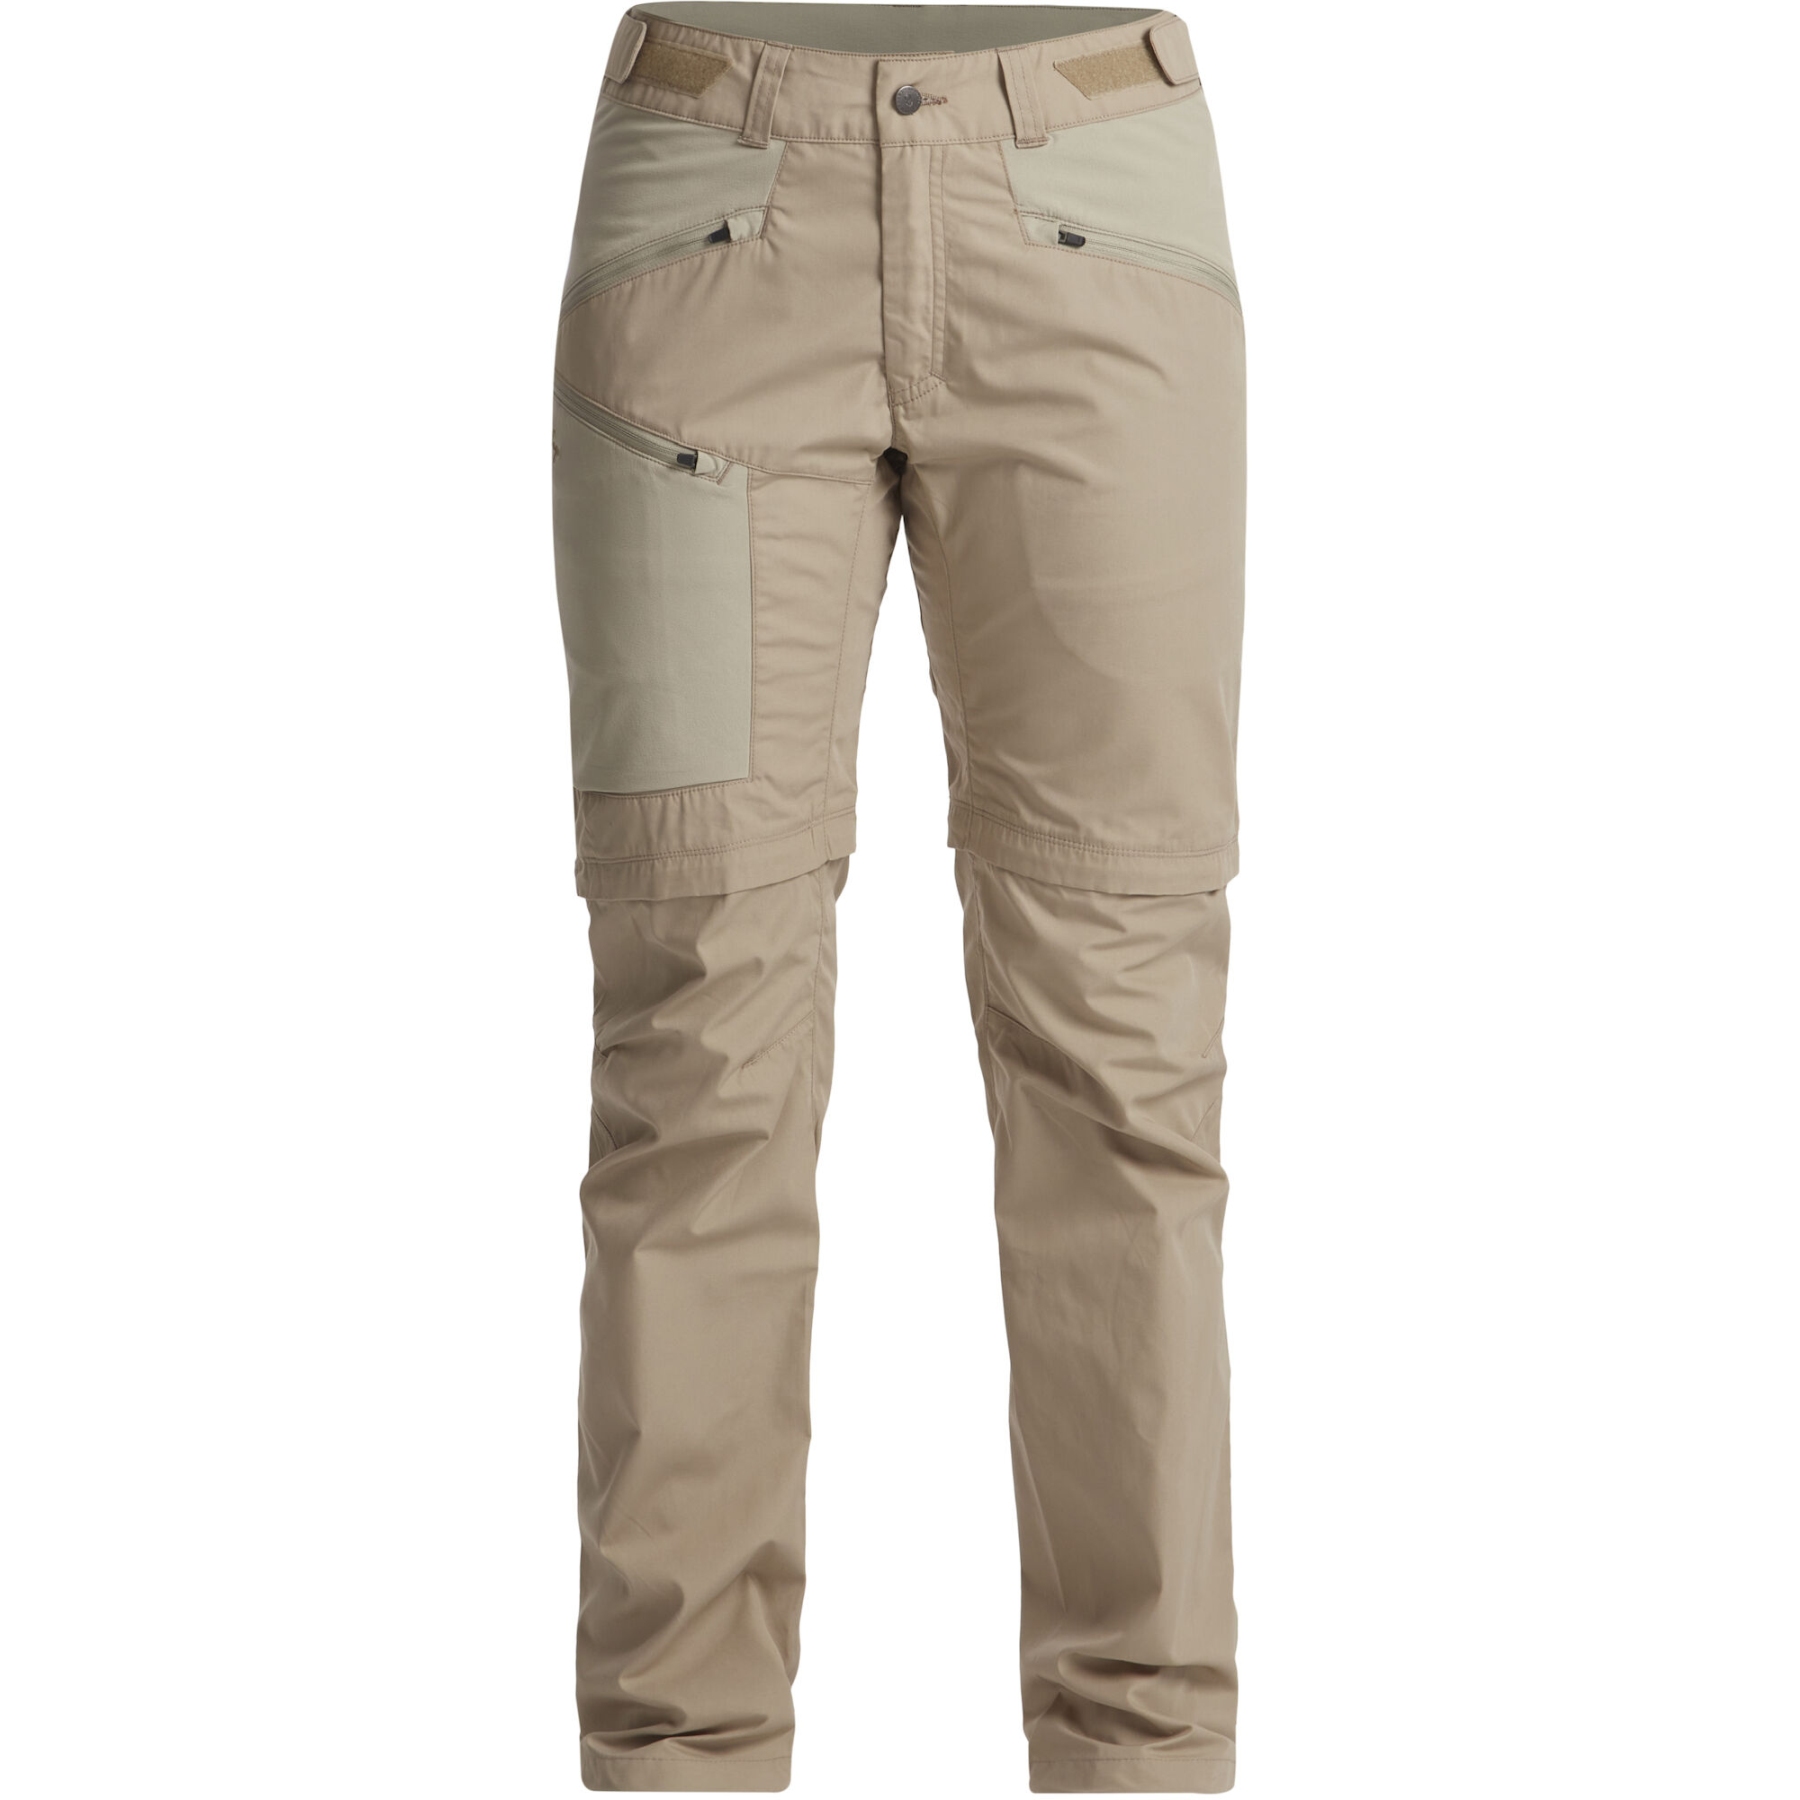 Picture of Lundhags Tived Zip-off Hiking Pants Men - Sand 730